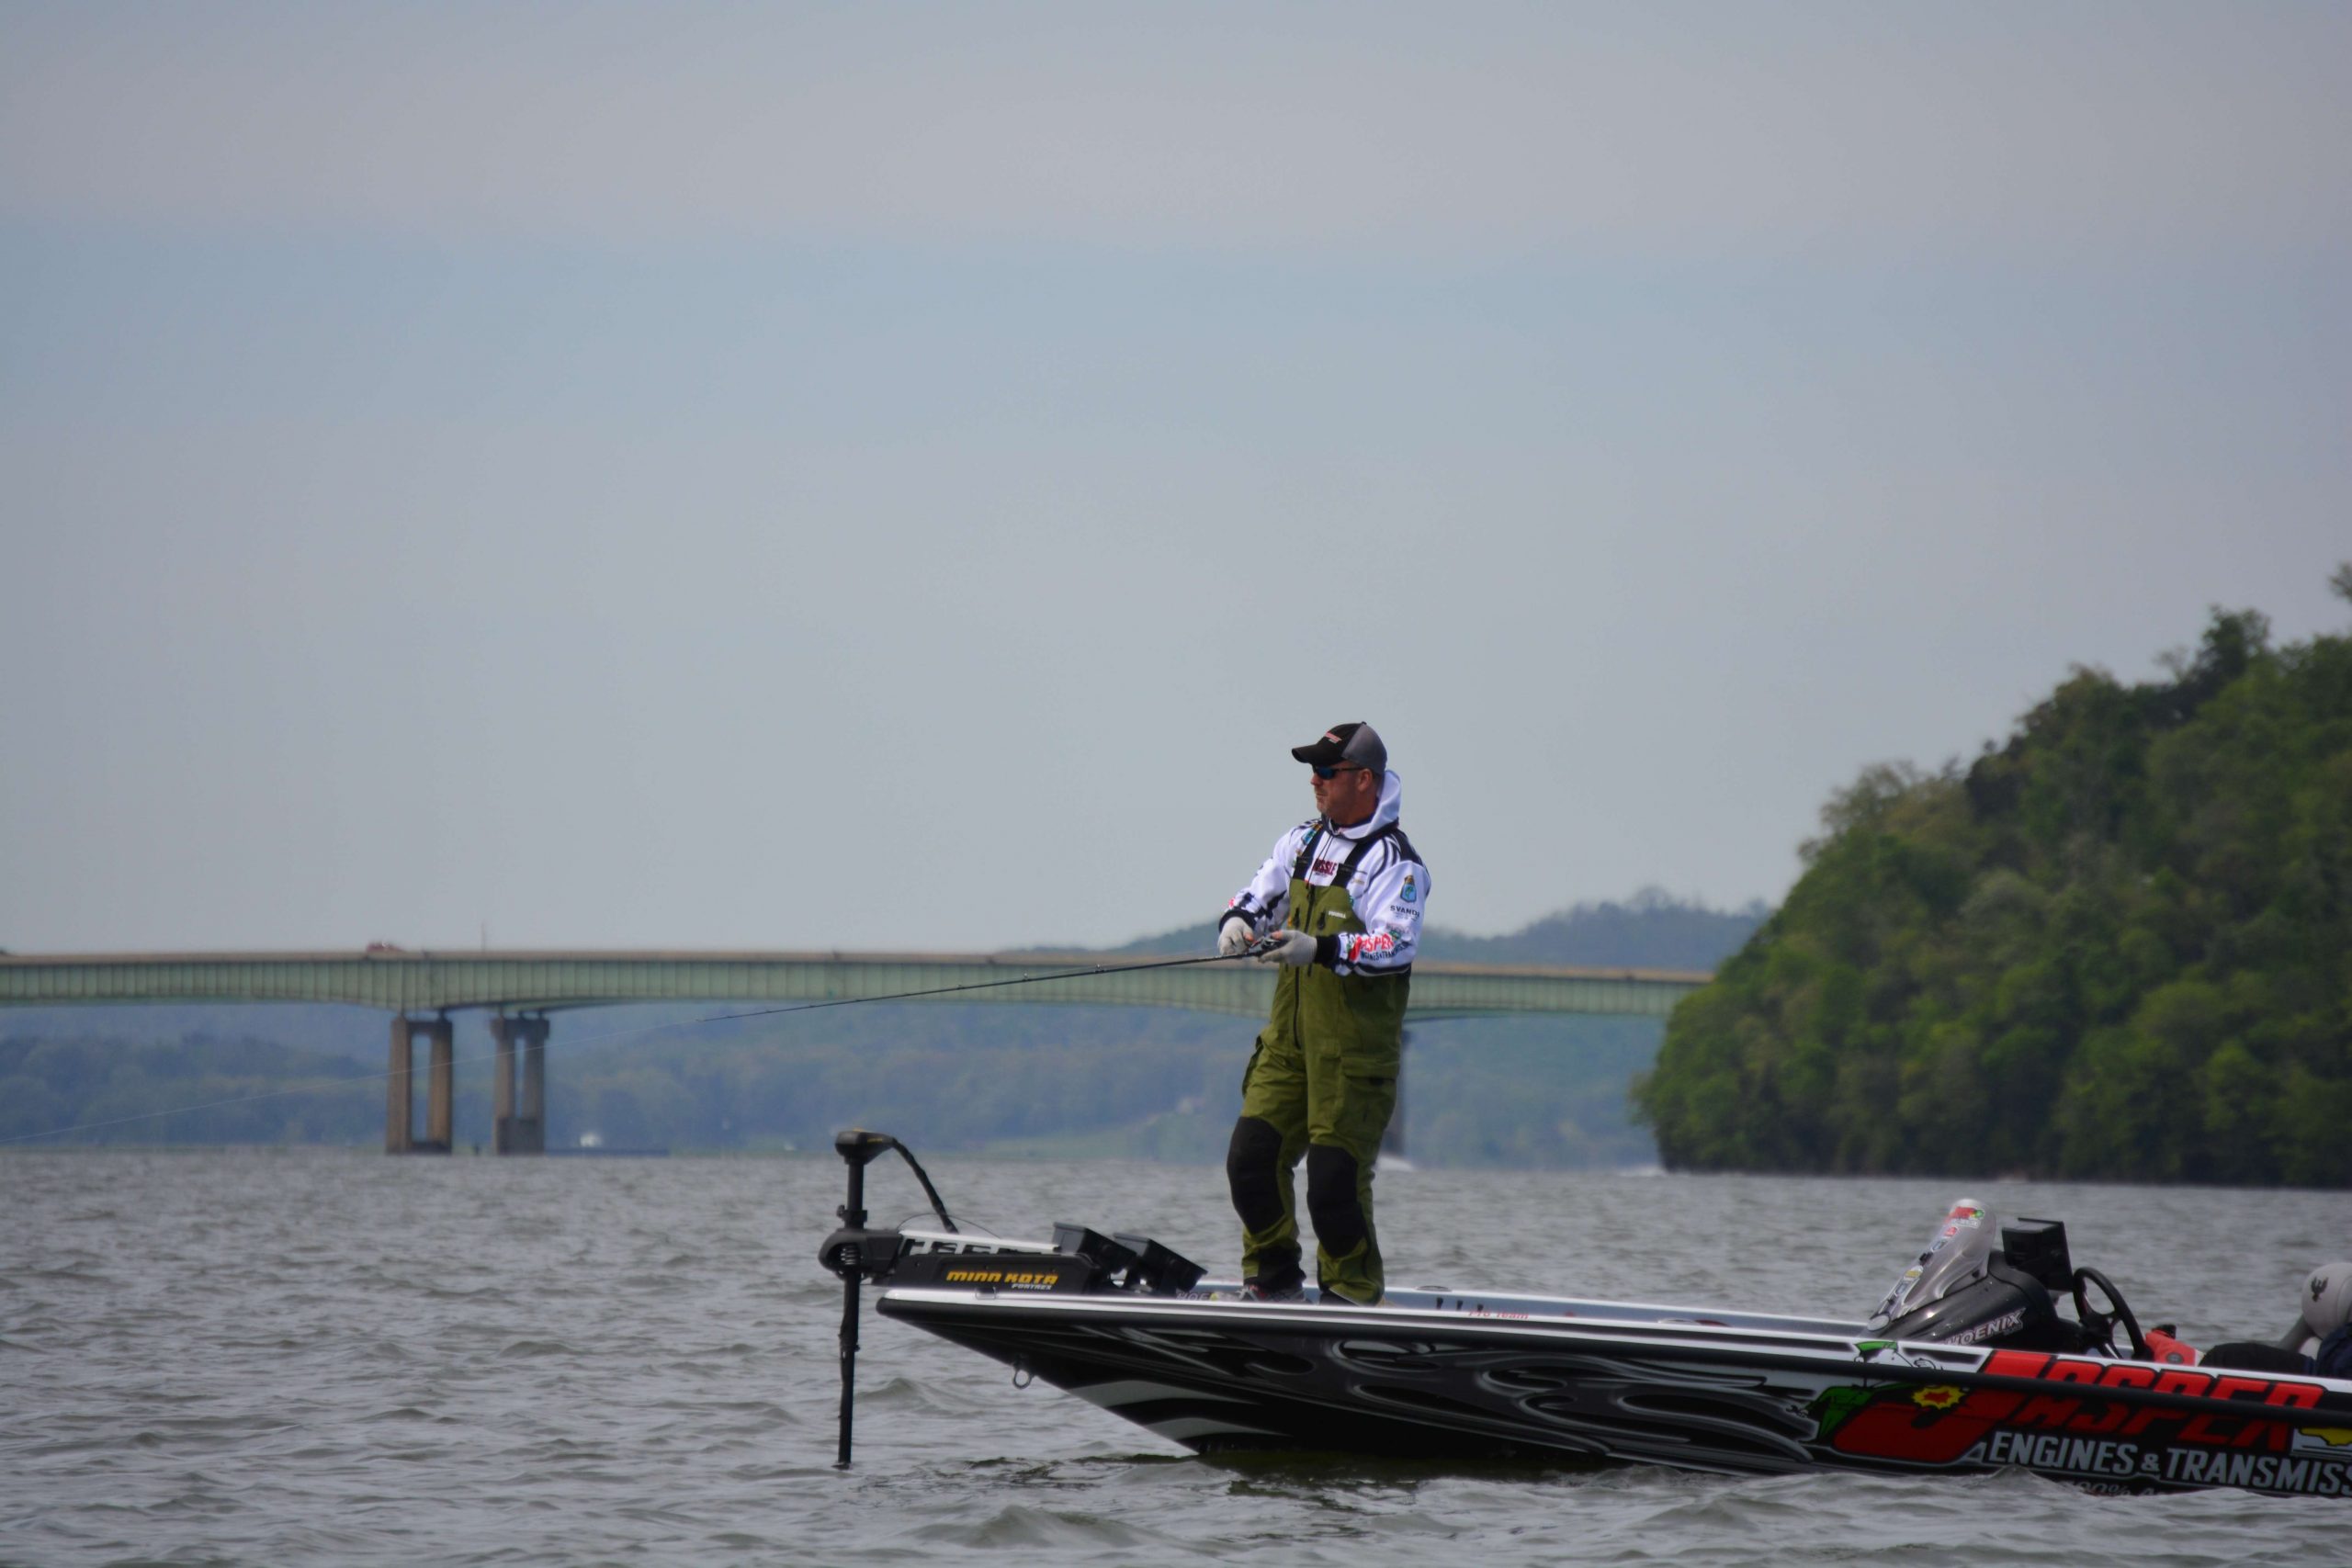 ... and we expect to see him with about 18 pounds at weigh-in, based on the BASSTrakk estimate.